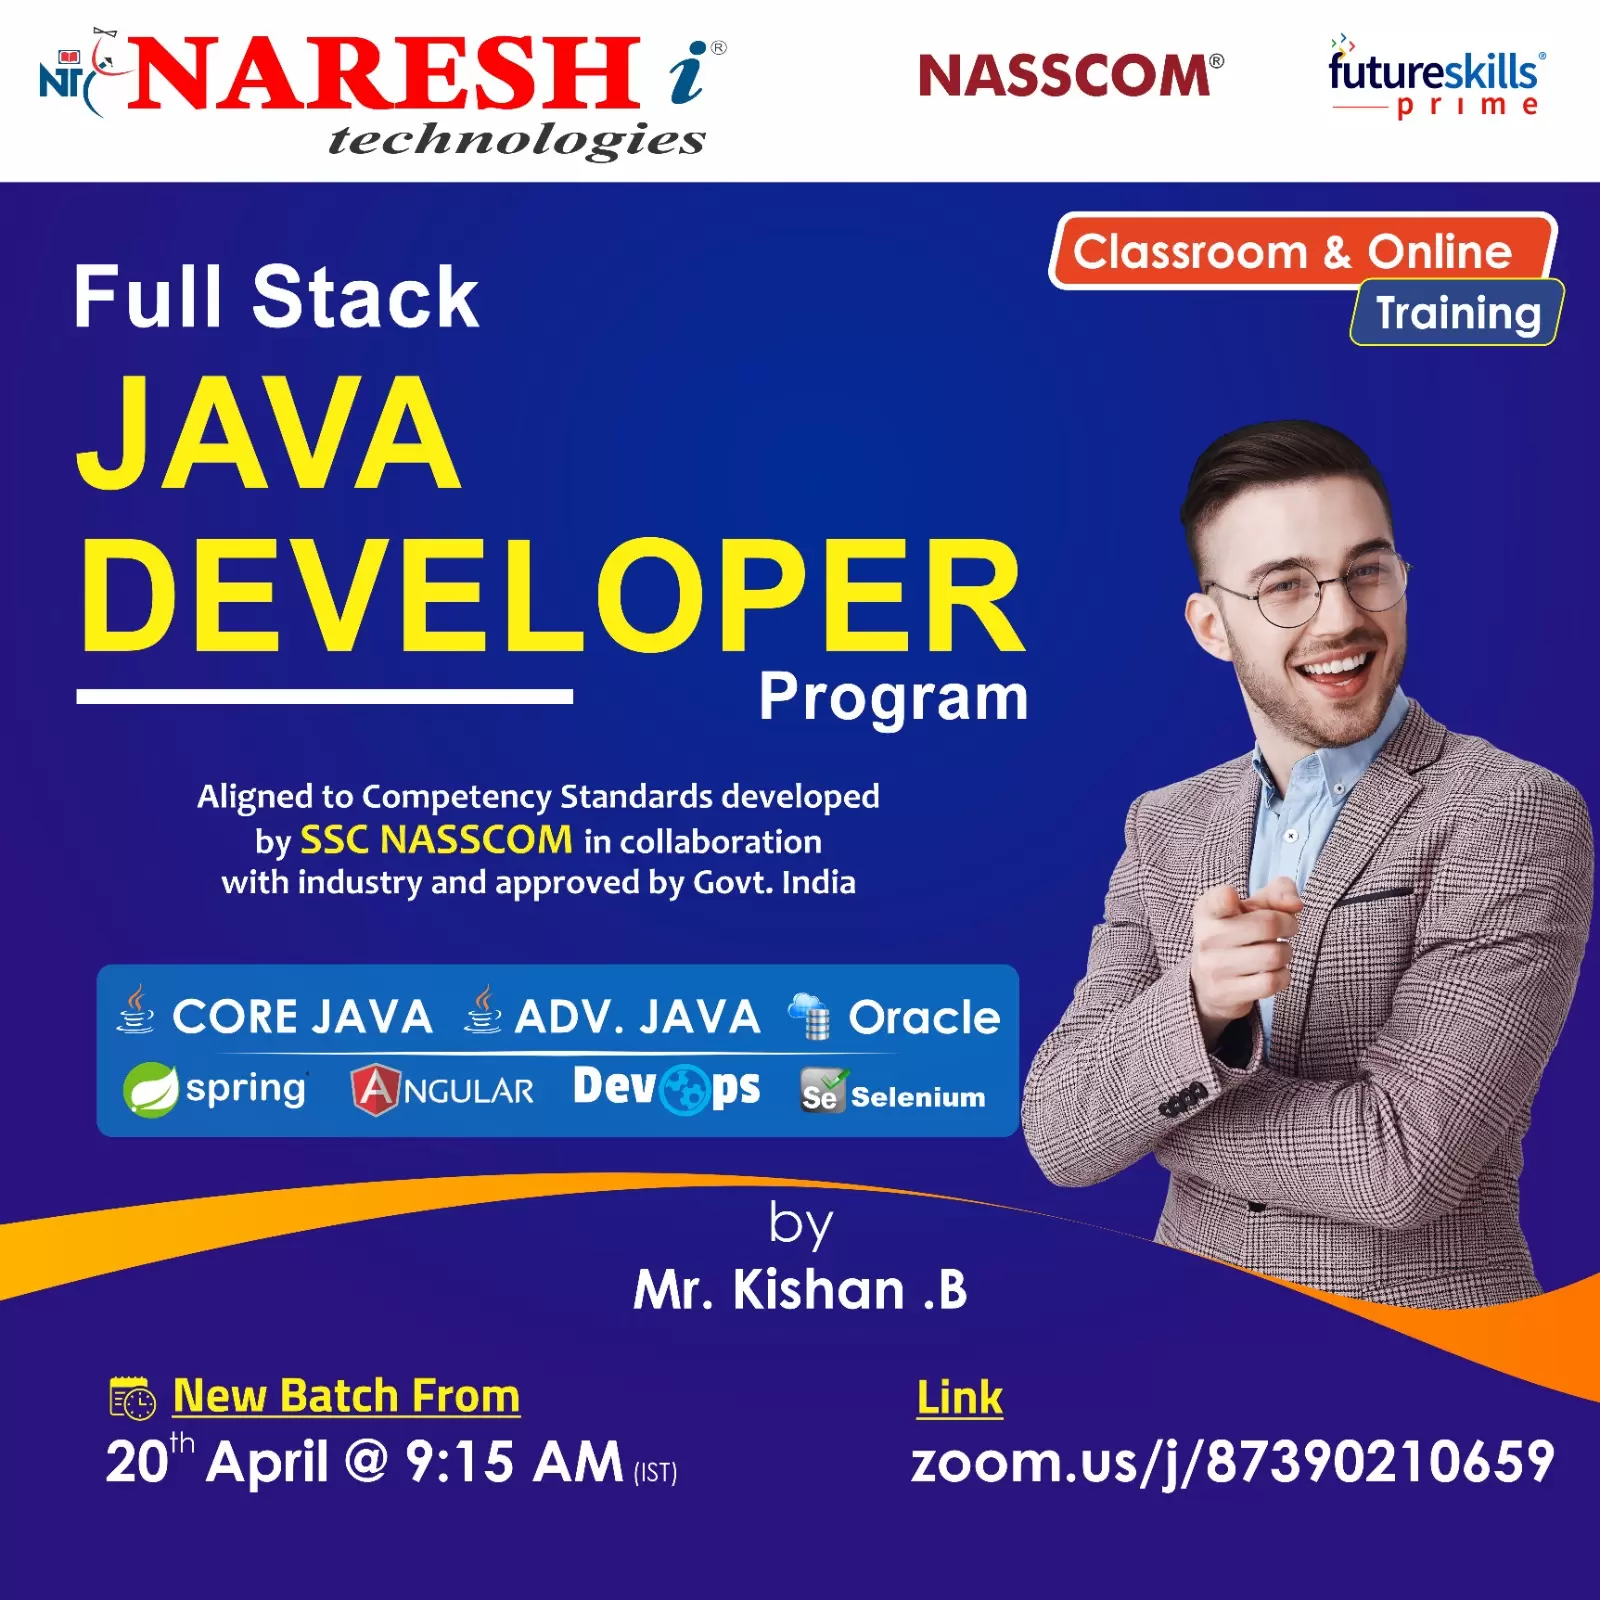 Attend a Free Demo On Full Stack Java Developer by Mr.  Kishan B